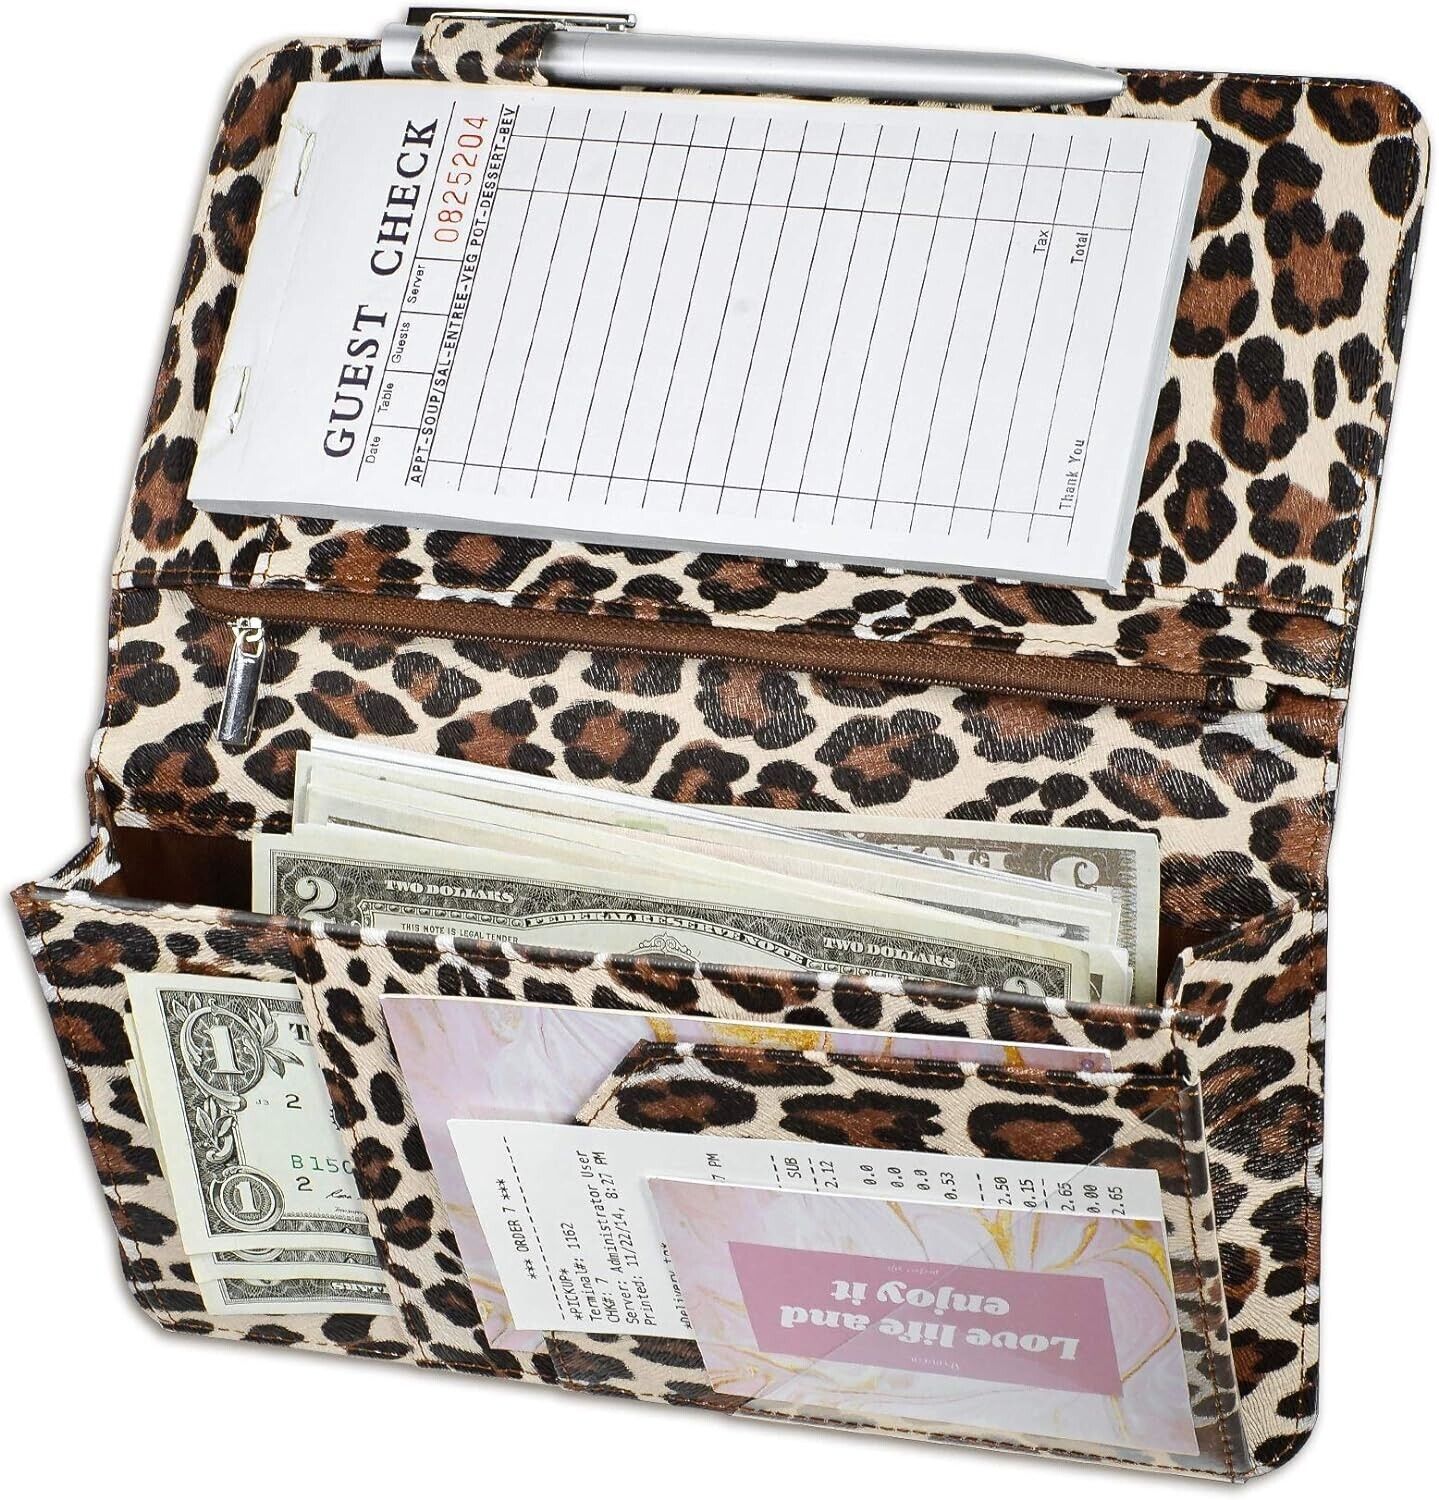 Server Book for Waitress, 5 X 9 Leopard Serving Books with Zipper Pouch, Magn...